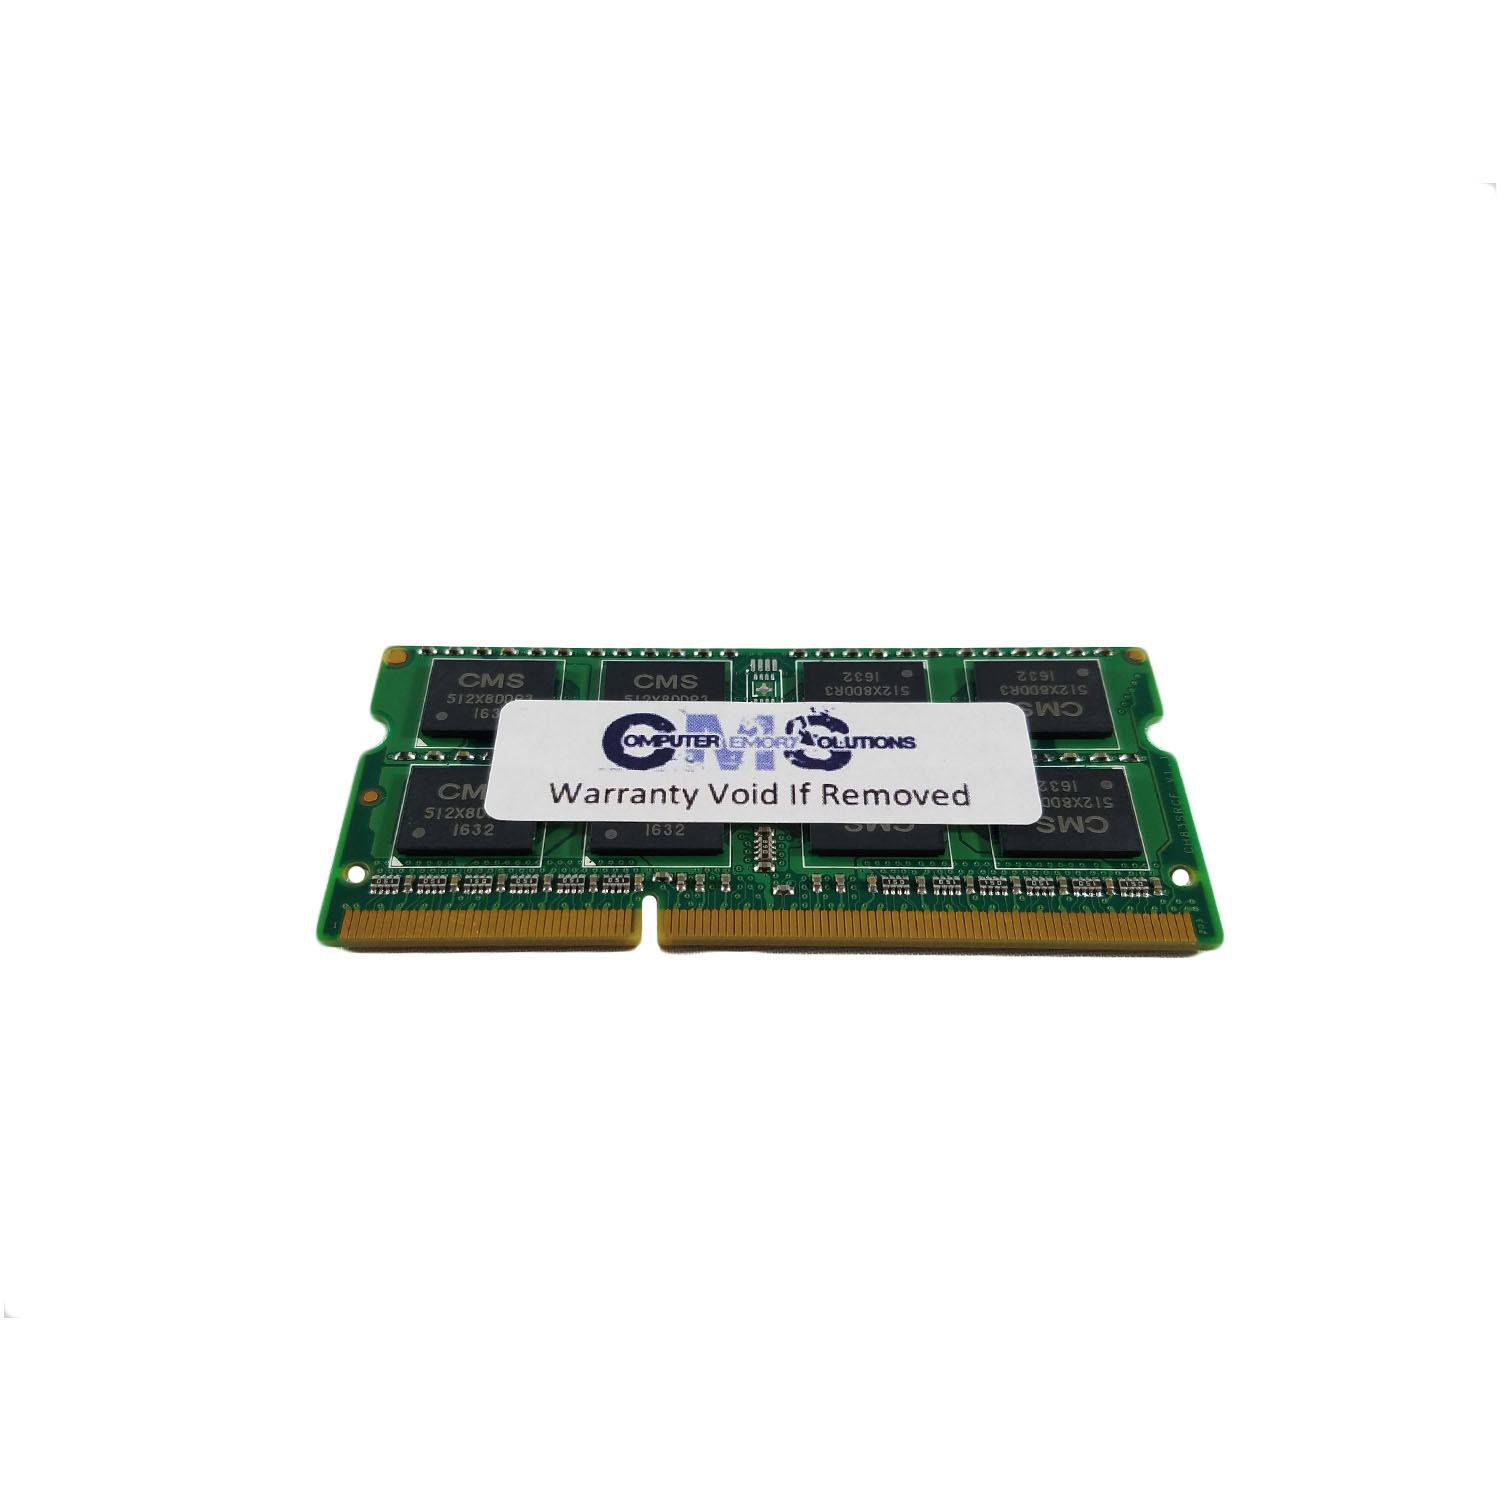 CMS 4GB (1X4GB) DDR3 10600 1333MHZ NON ECC SODIMM Memory Ram Compatible with Panasonic Toughbook Cf-53, Cf-53A, Cf-53C - A30 - image 2 of 3